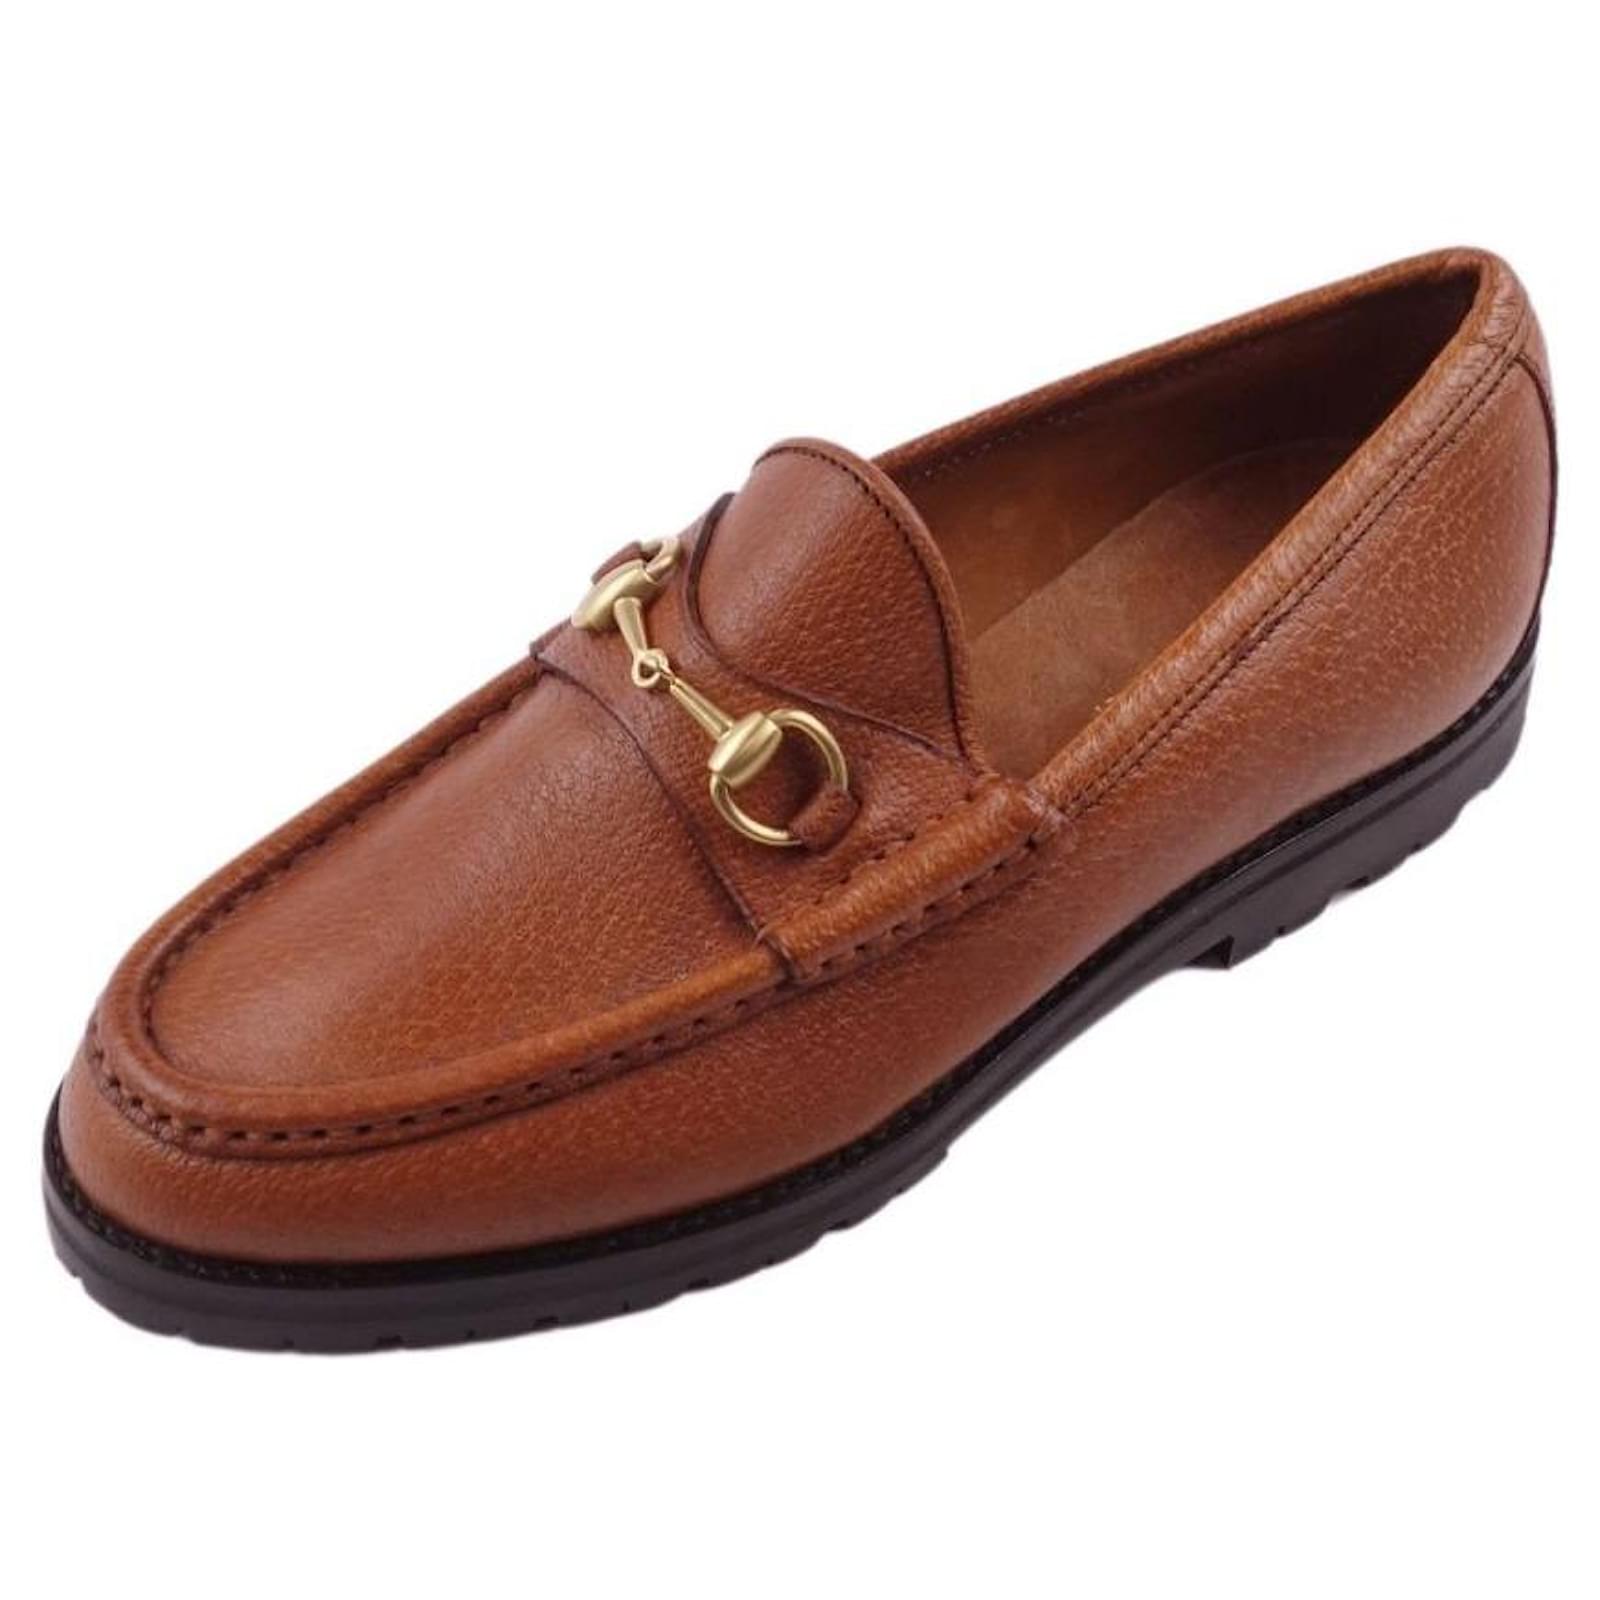 Vintag GUCCI Loafers Moccasins Horsebit Leather Shoes Women's Brown Size 35  1 / 2C (equivalent to )  - Joli Closet